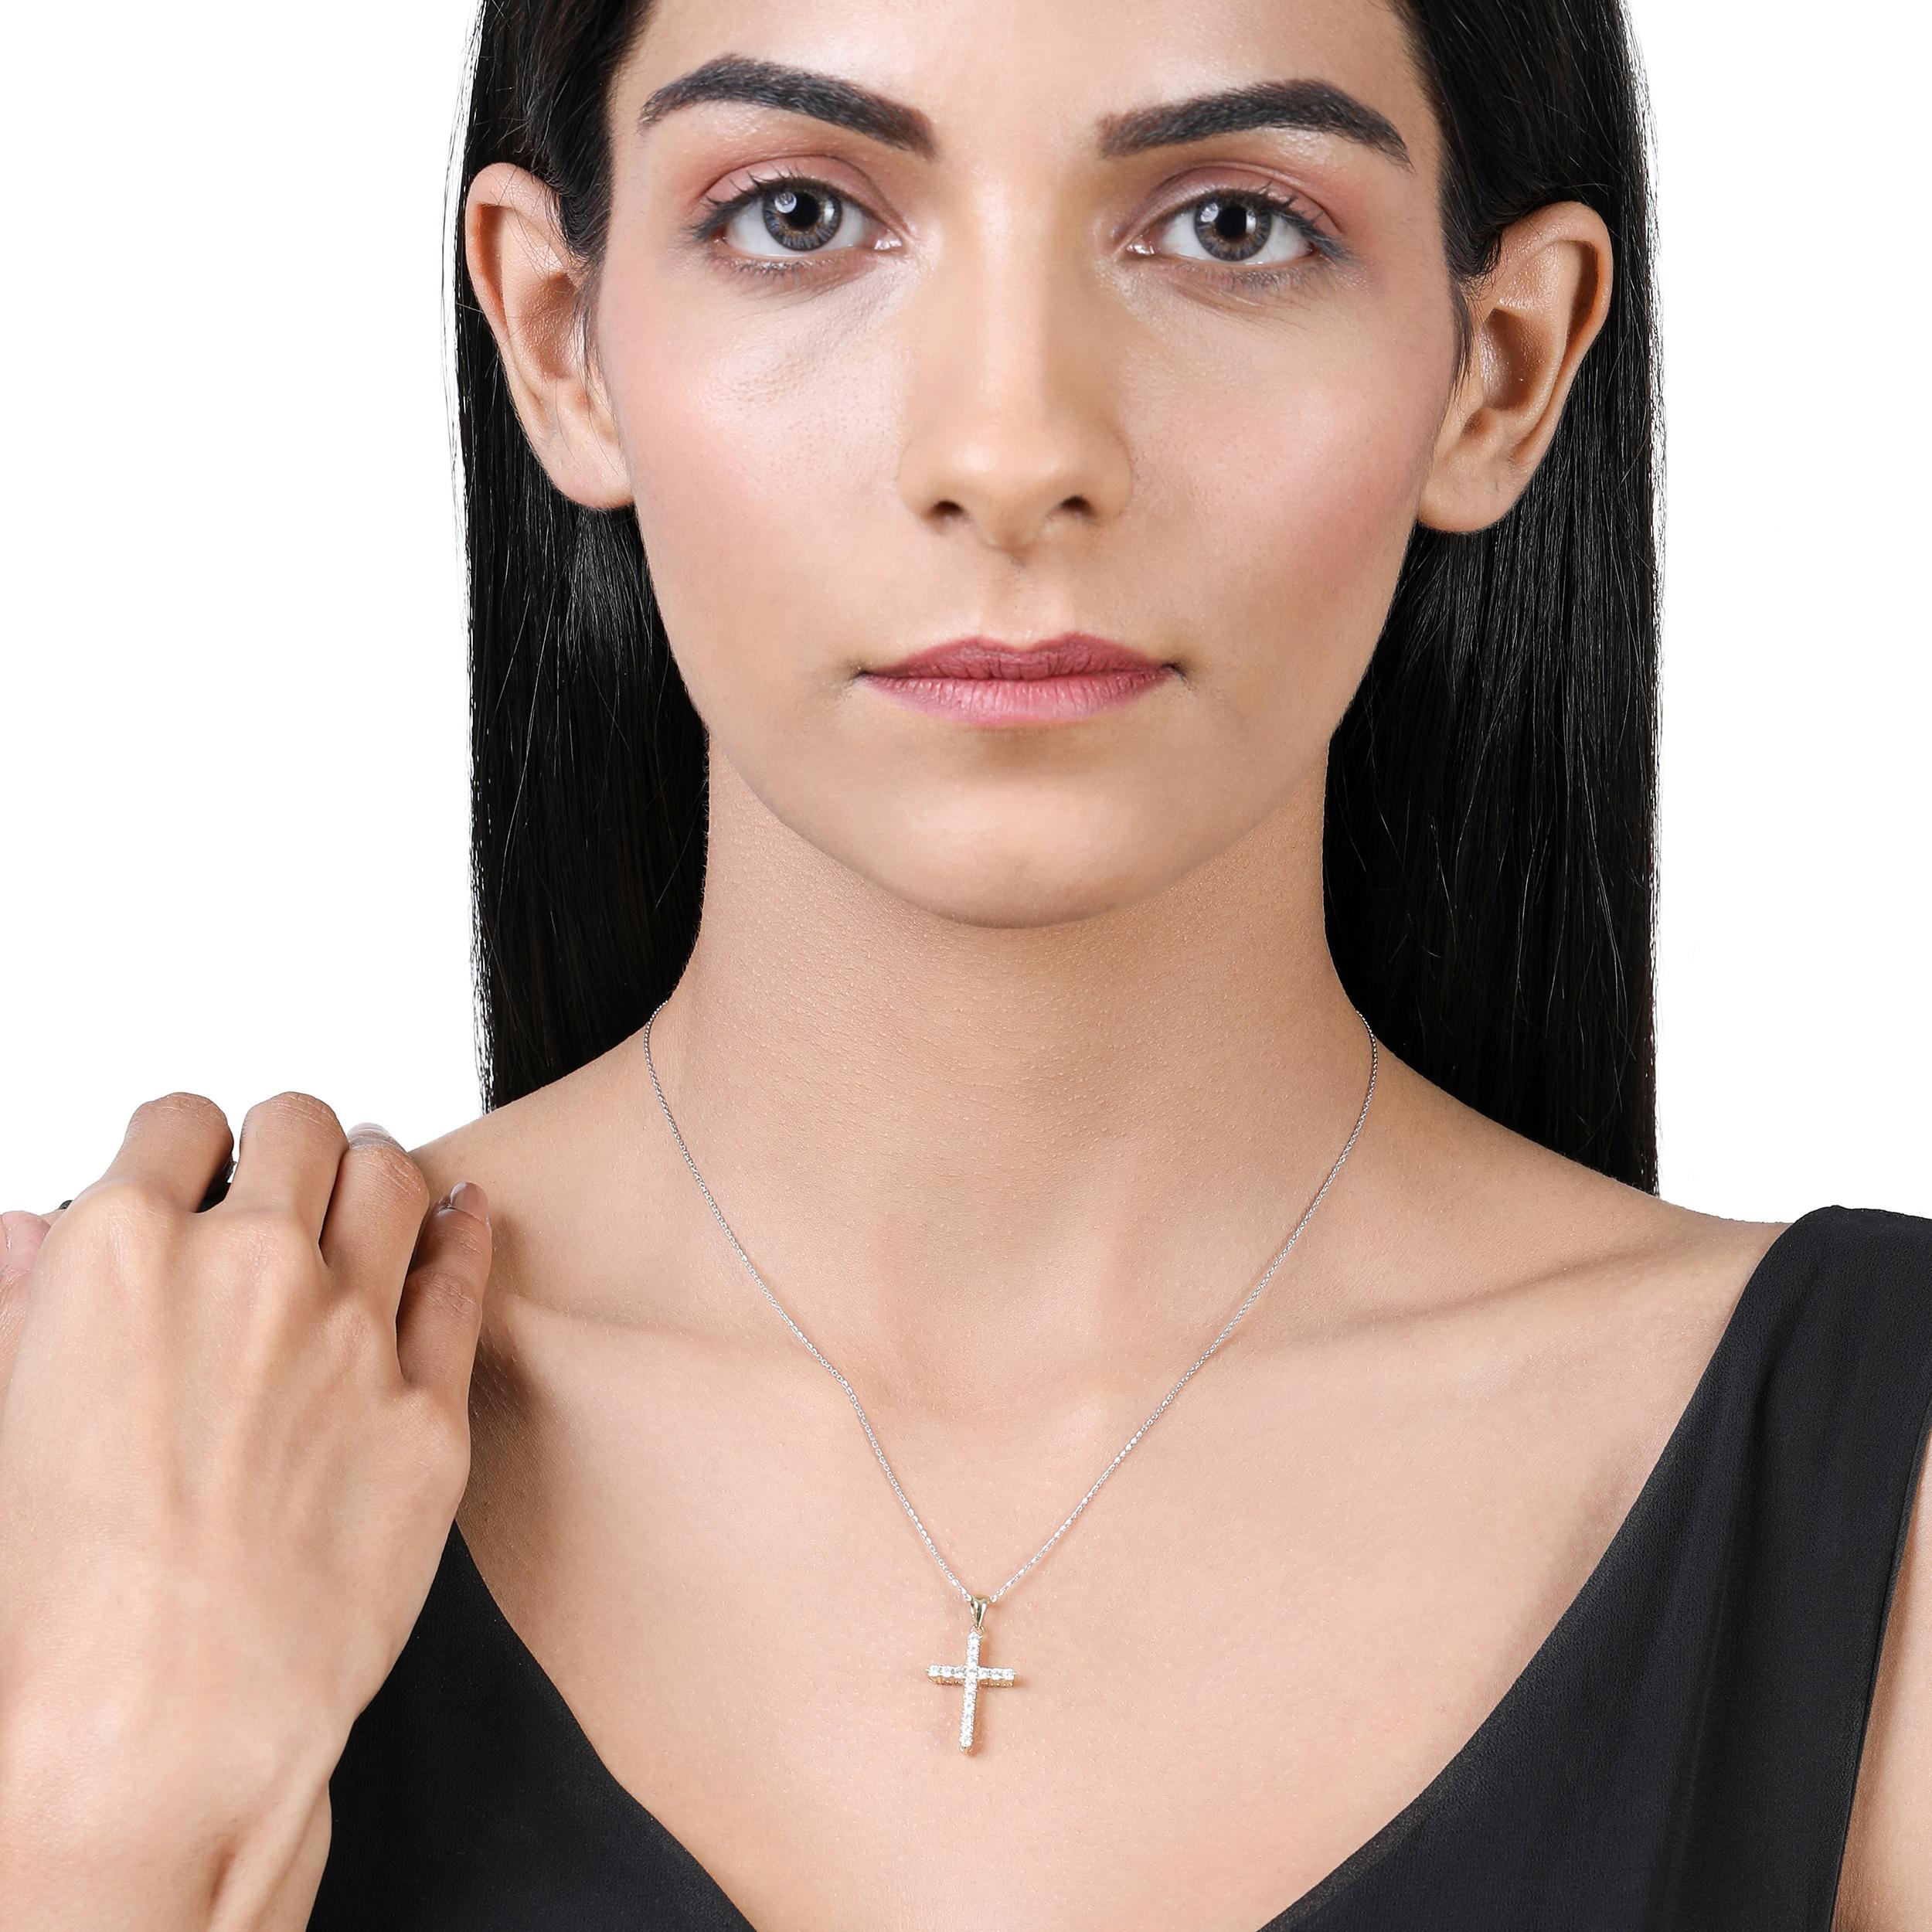 THIS STYLE DOES NOT INCLUDE A CHAIN. Crafted in 1.8 grams of 14K Yellow Gold, the pendant contains 16 stones of Round Diamonds with a total of 0.45 carat in G-H color and SI carat.
This jewelry piece will be expertly crafted by our skilled artisans